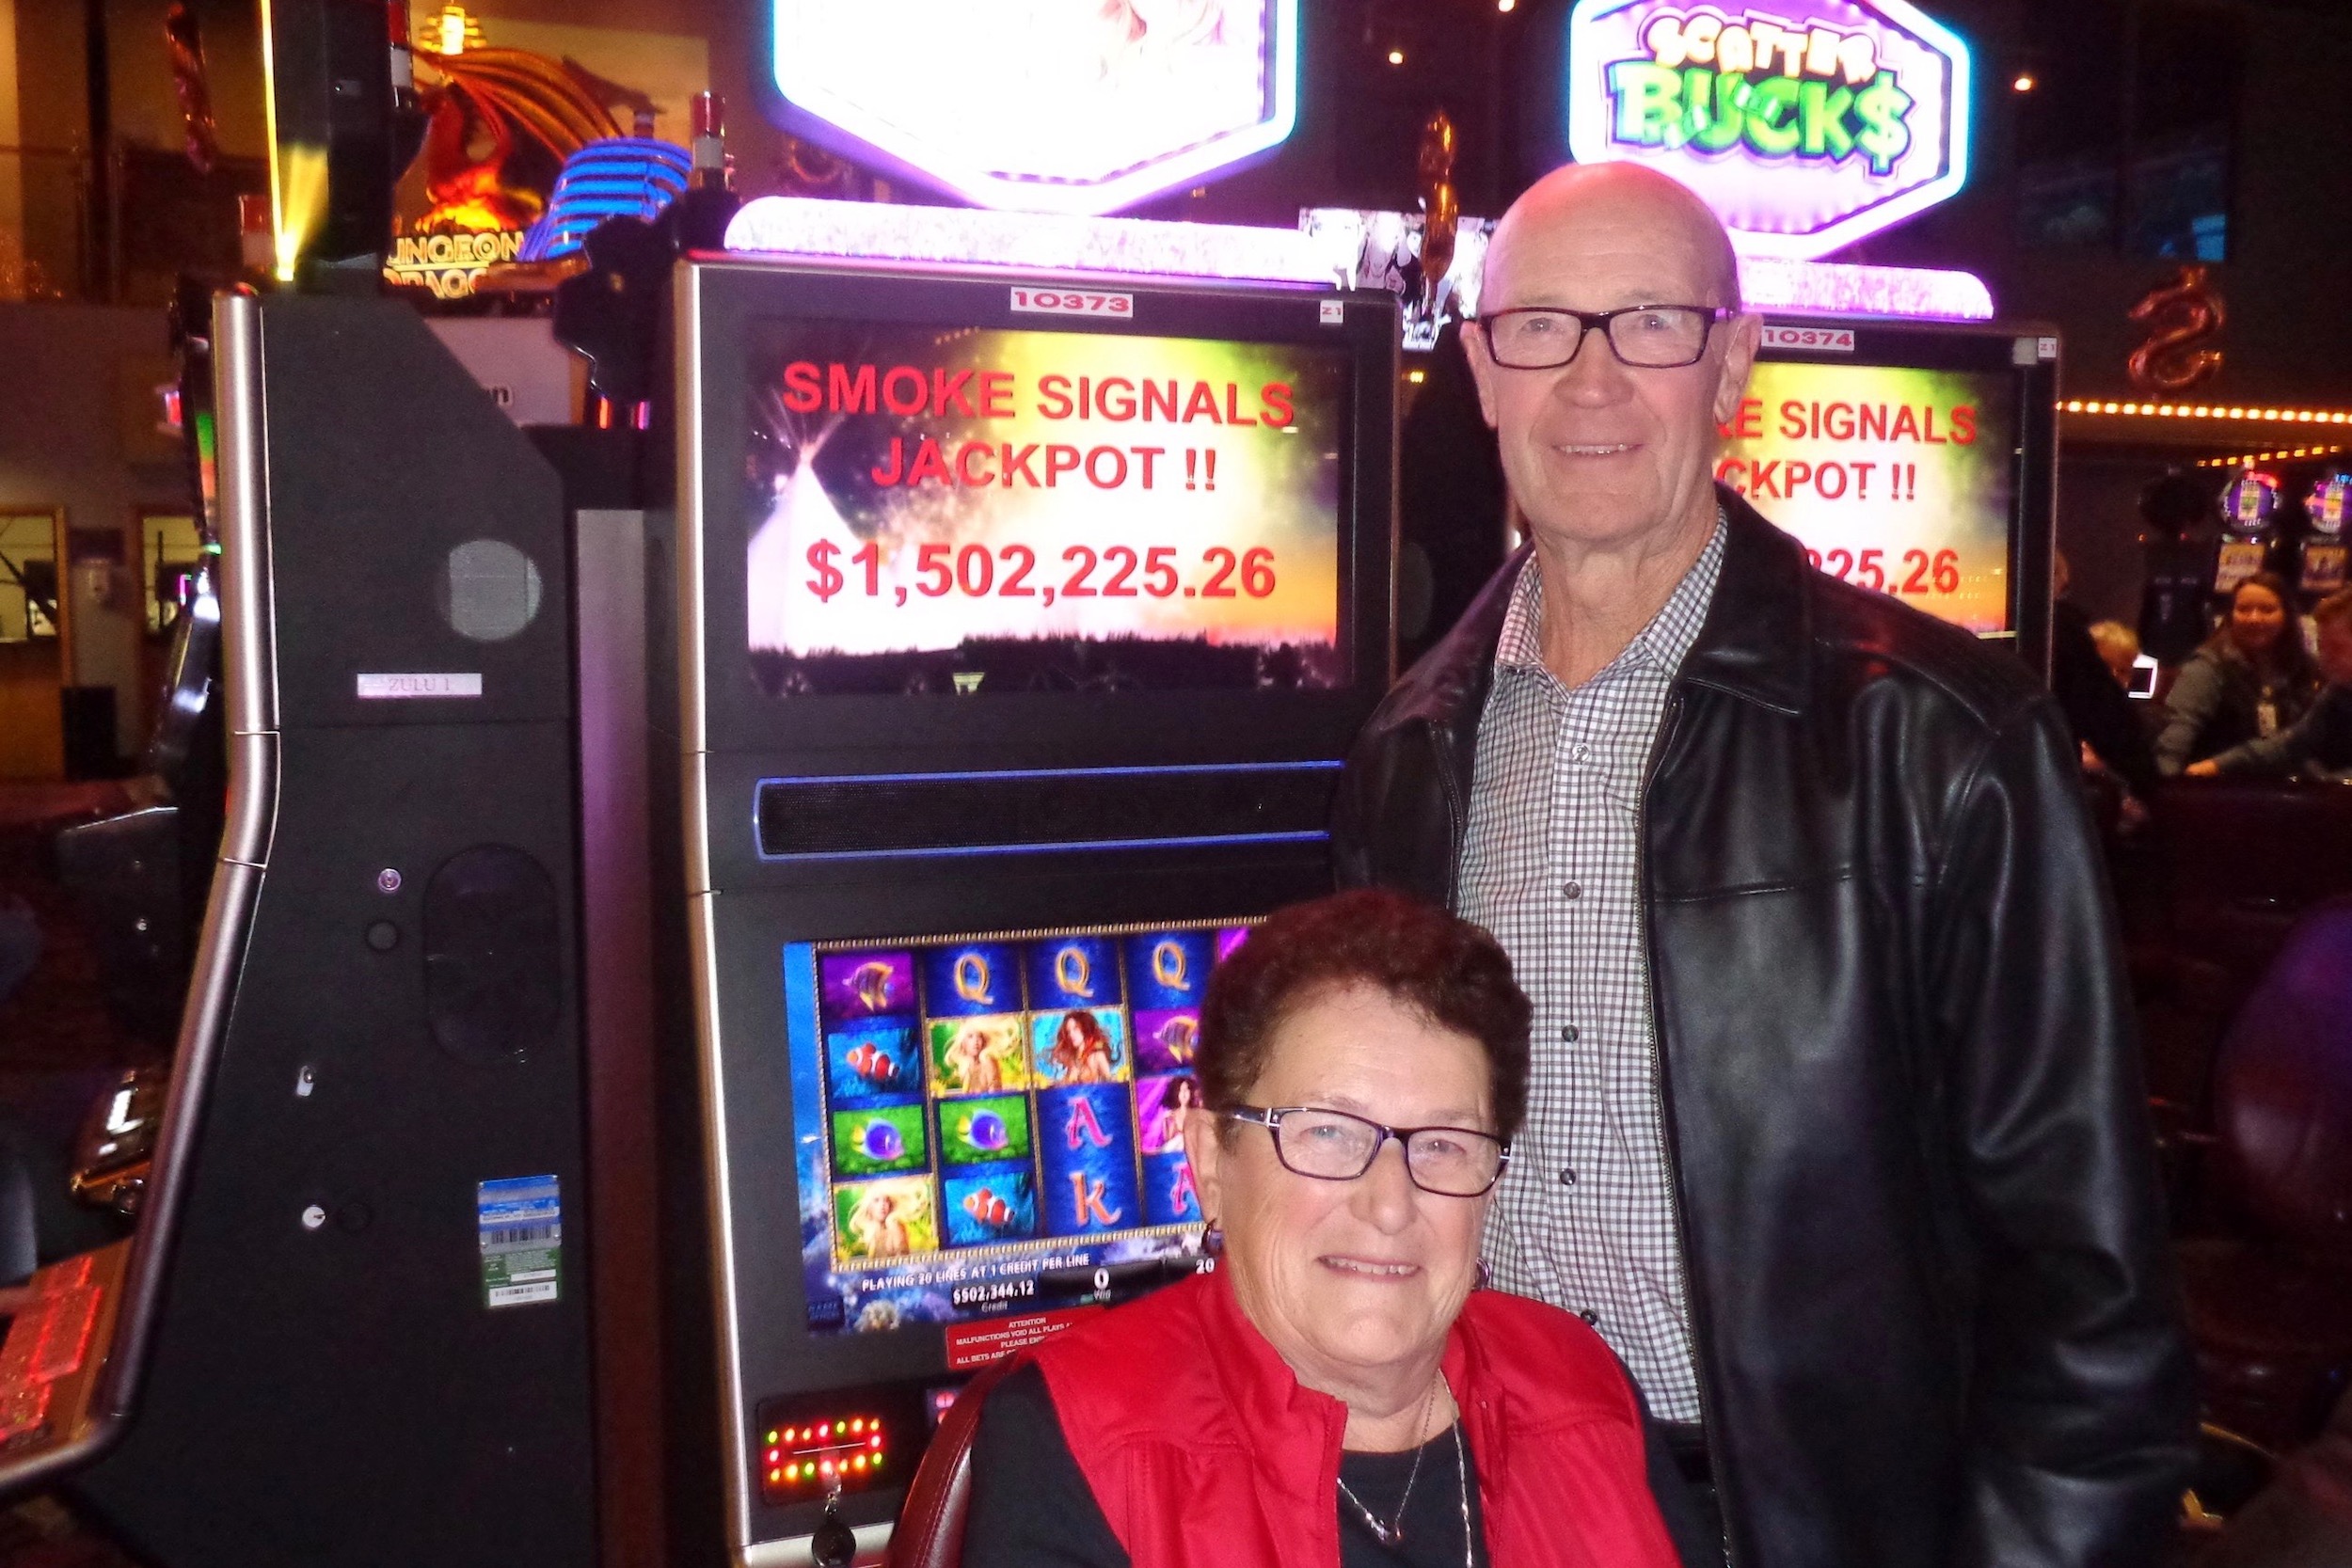 First Nations casino in Saskatchewan pays out $1.5M jackpot